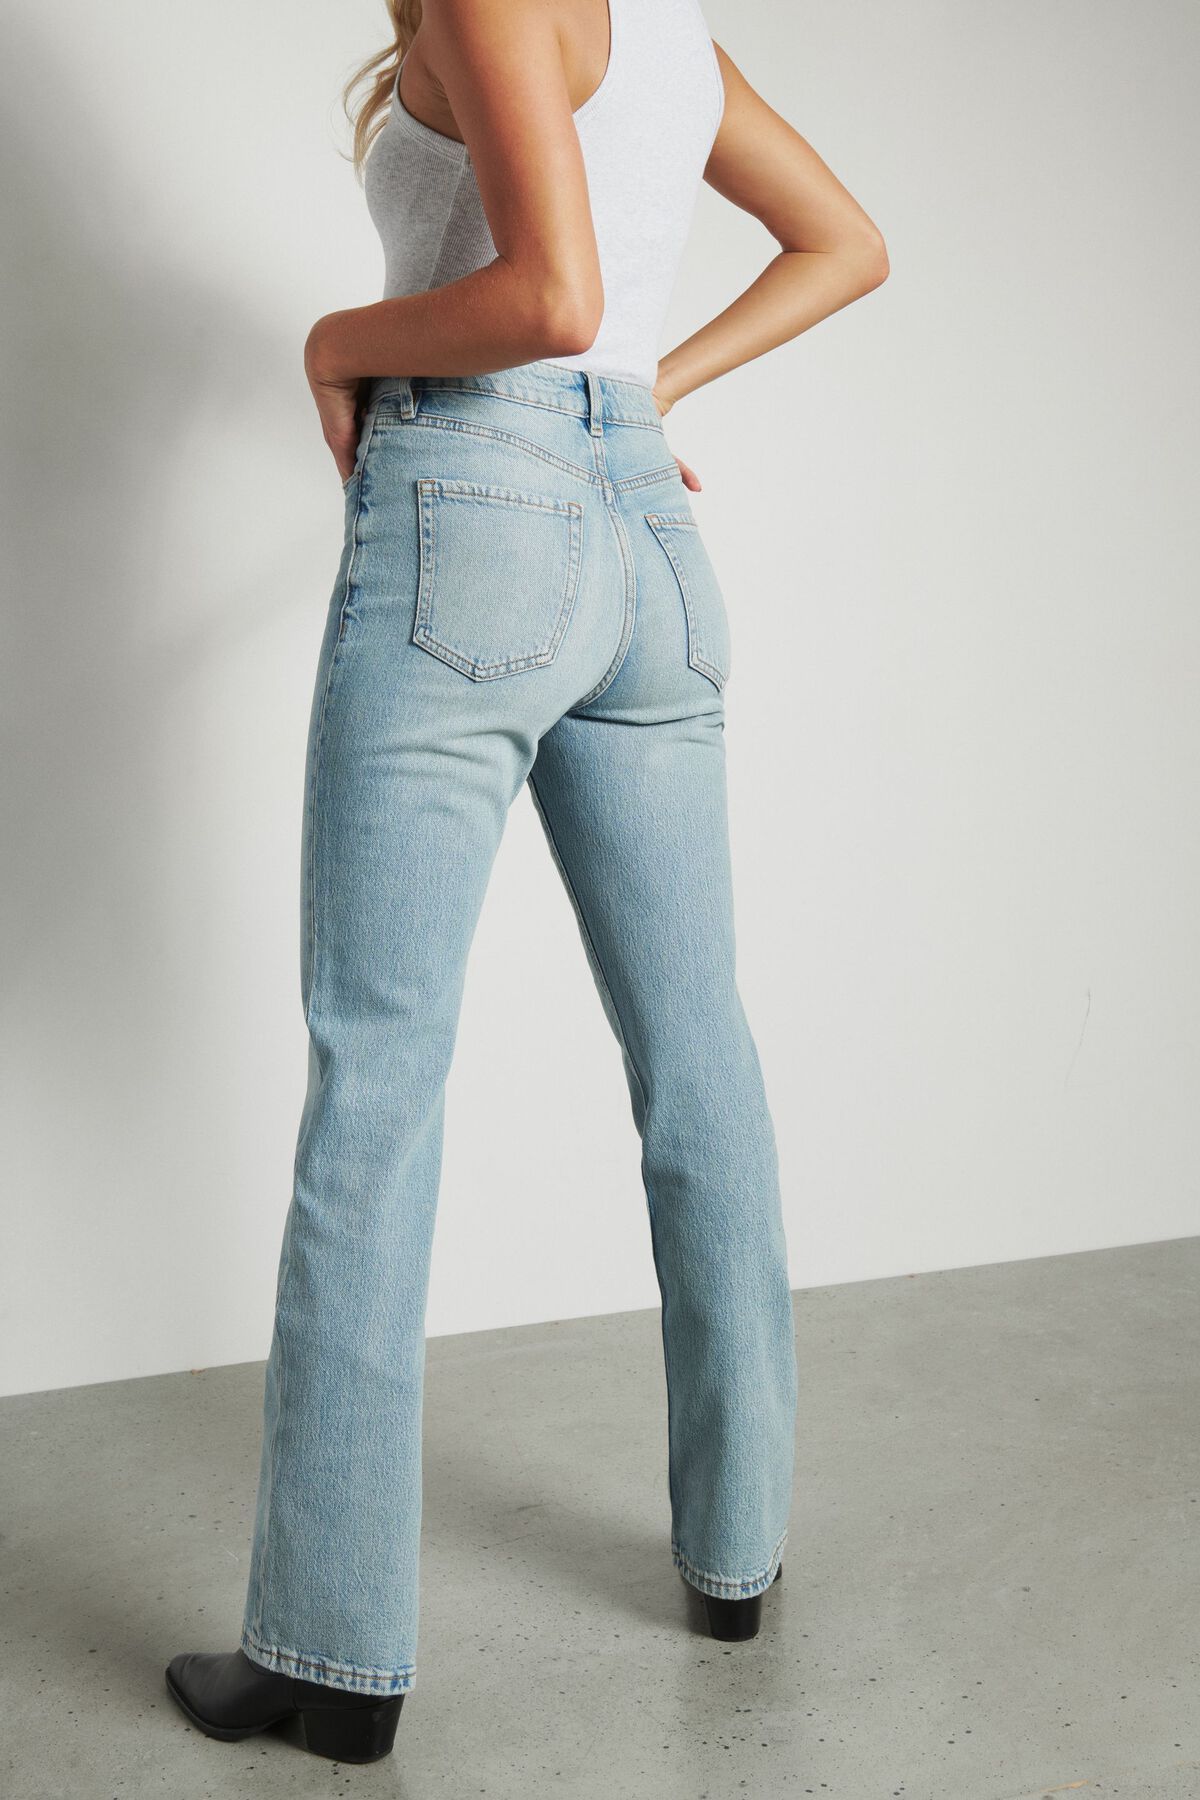 Dynamite Candice Bootcut Jeans. 5